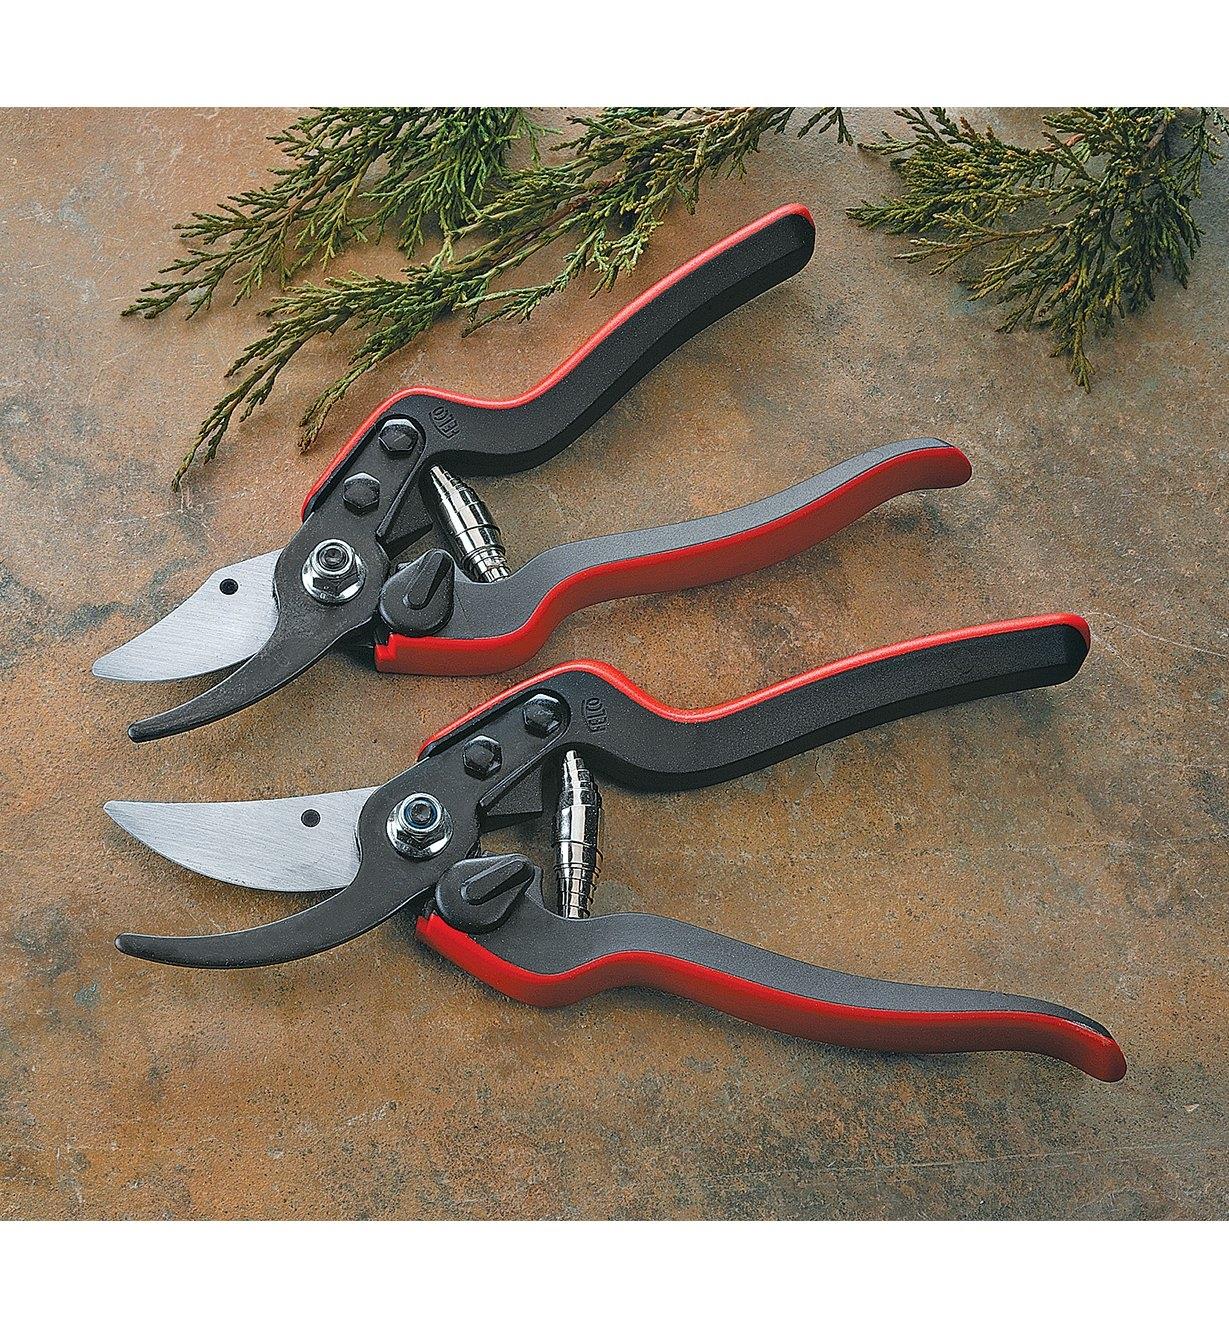 Two Felco Composite-Handle Pruners lying next to some cut branches